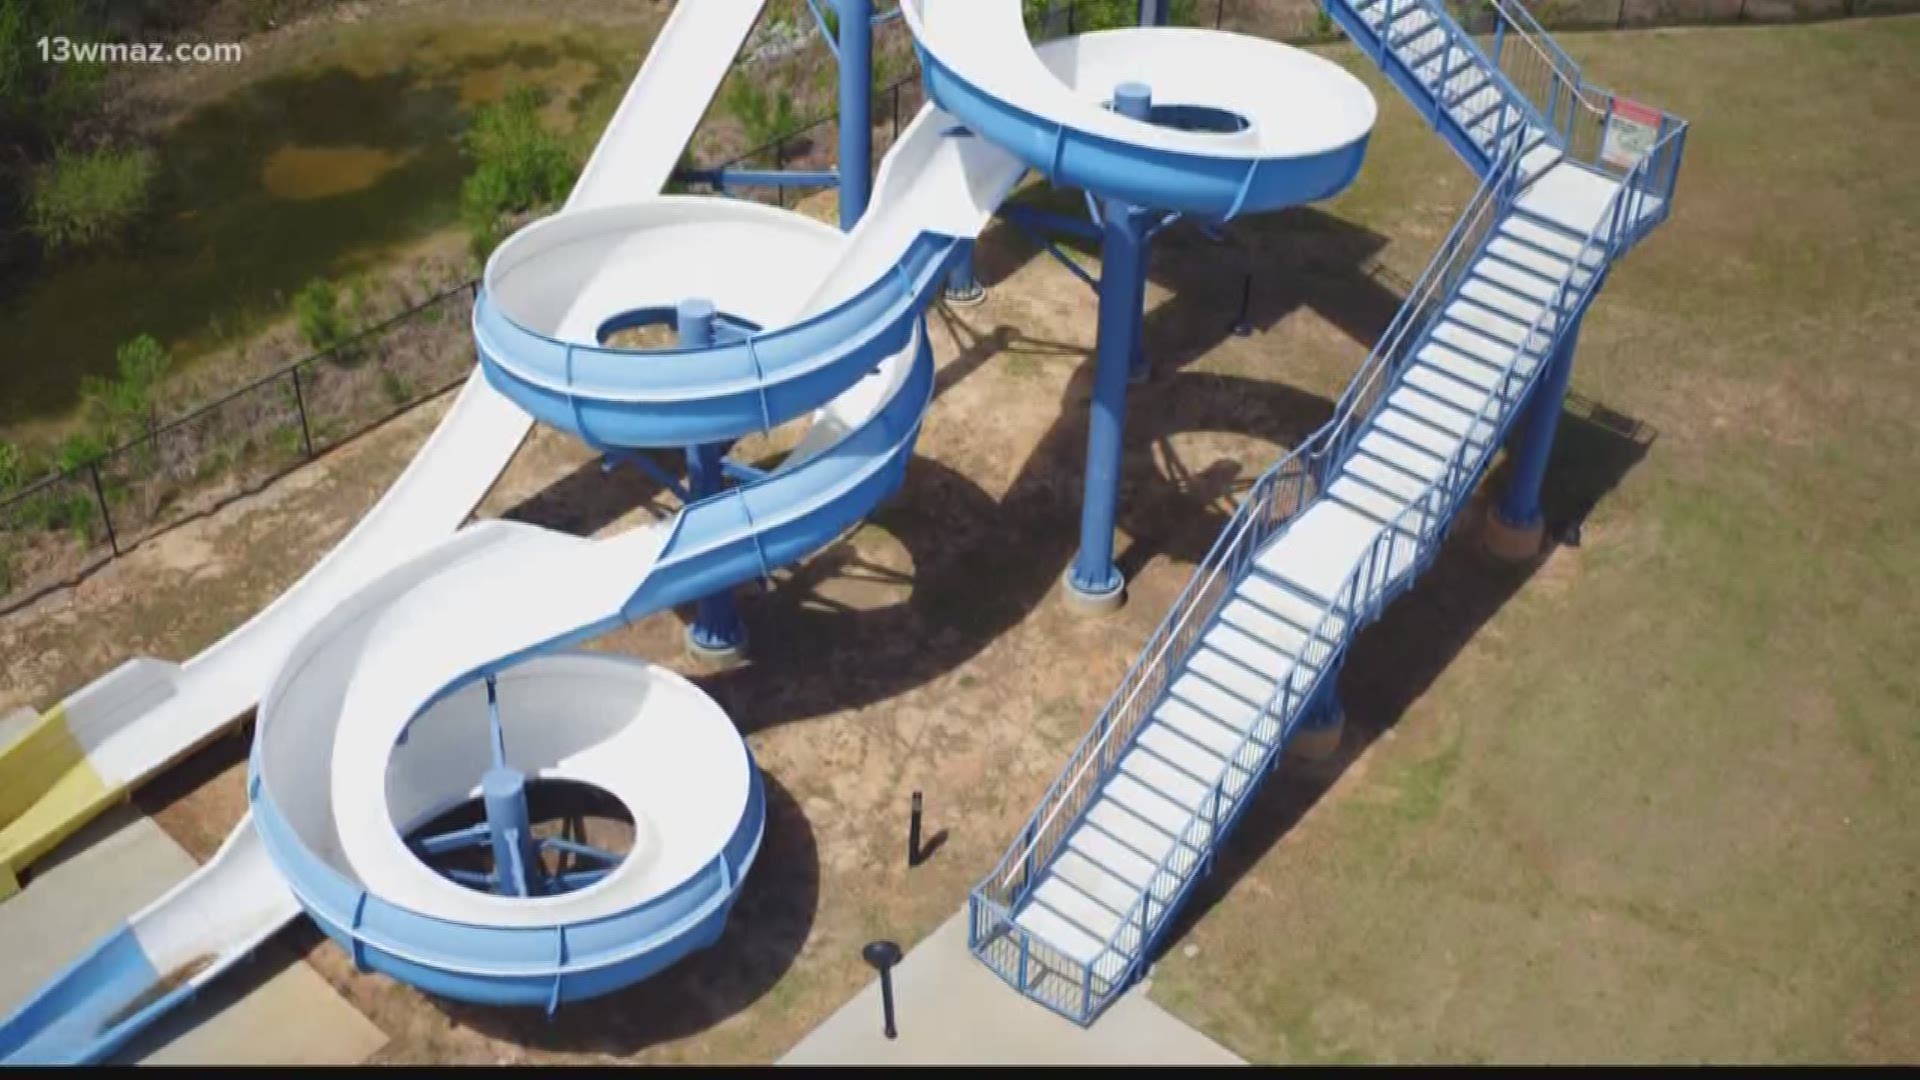 Macon's Sandy Beach Water Park by Lake Tobesofkee is up for sale, just in time for someone to grab it before summer rolls around.